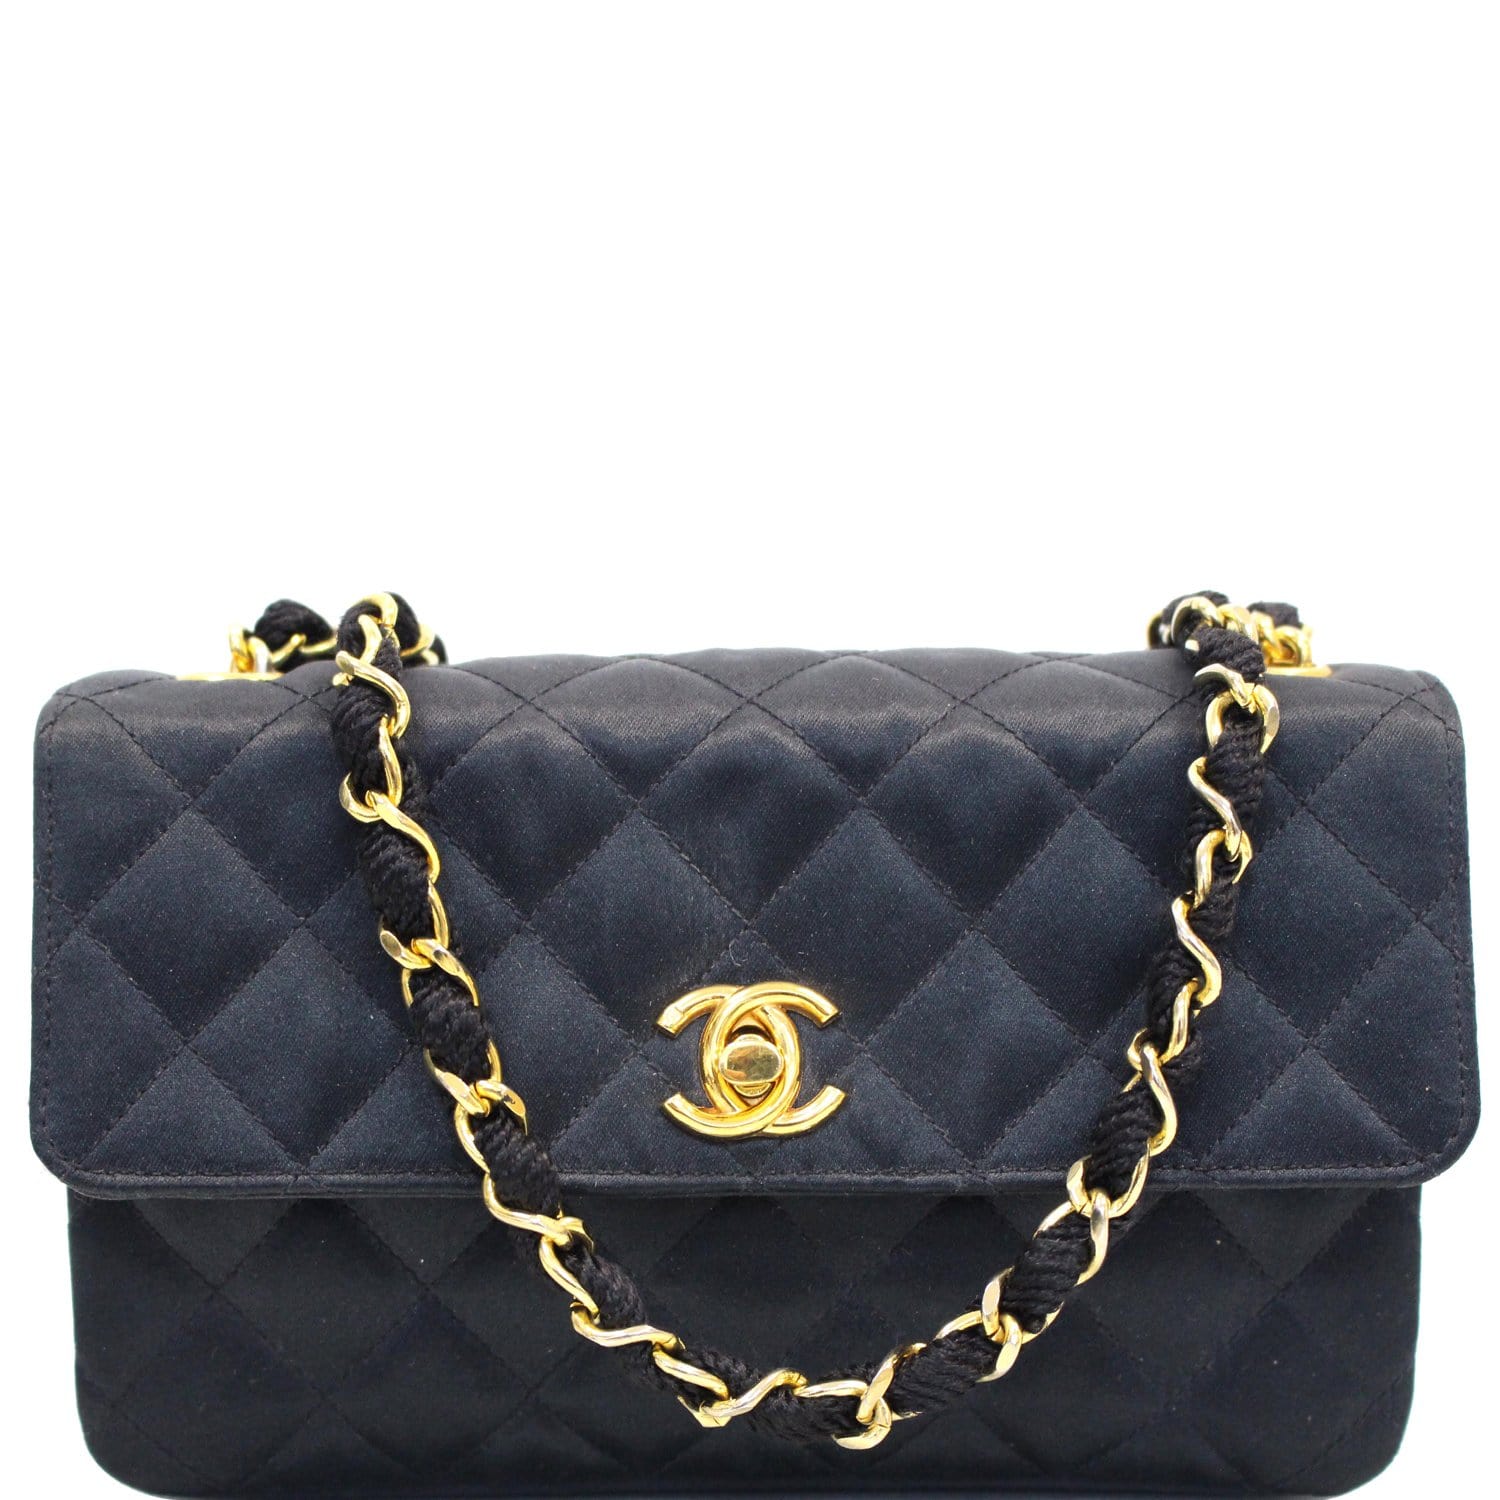 Chanel Wallet On Chain Timeless/classique Leather Handbag In Black